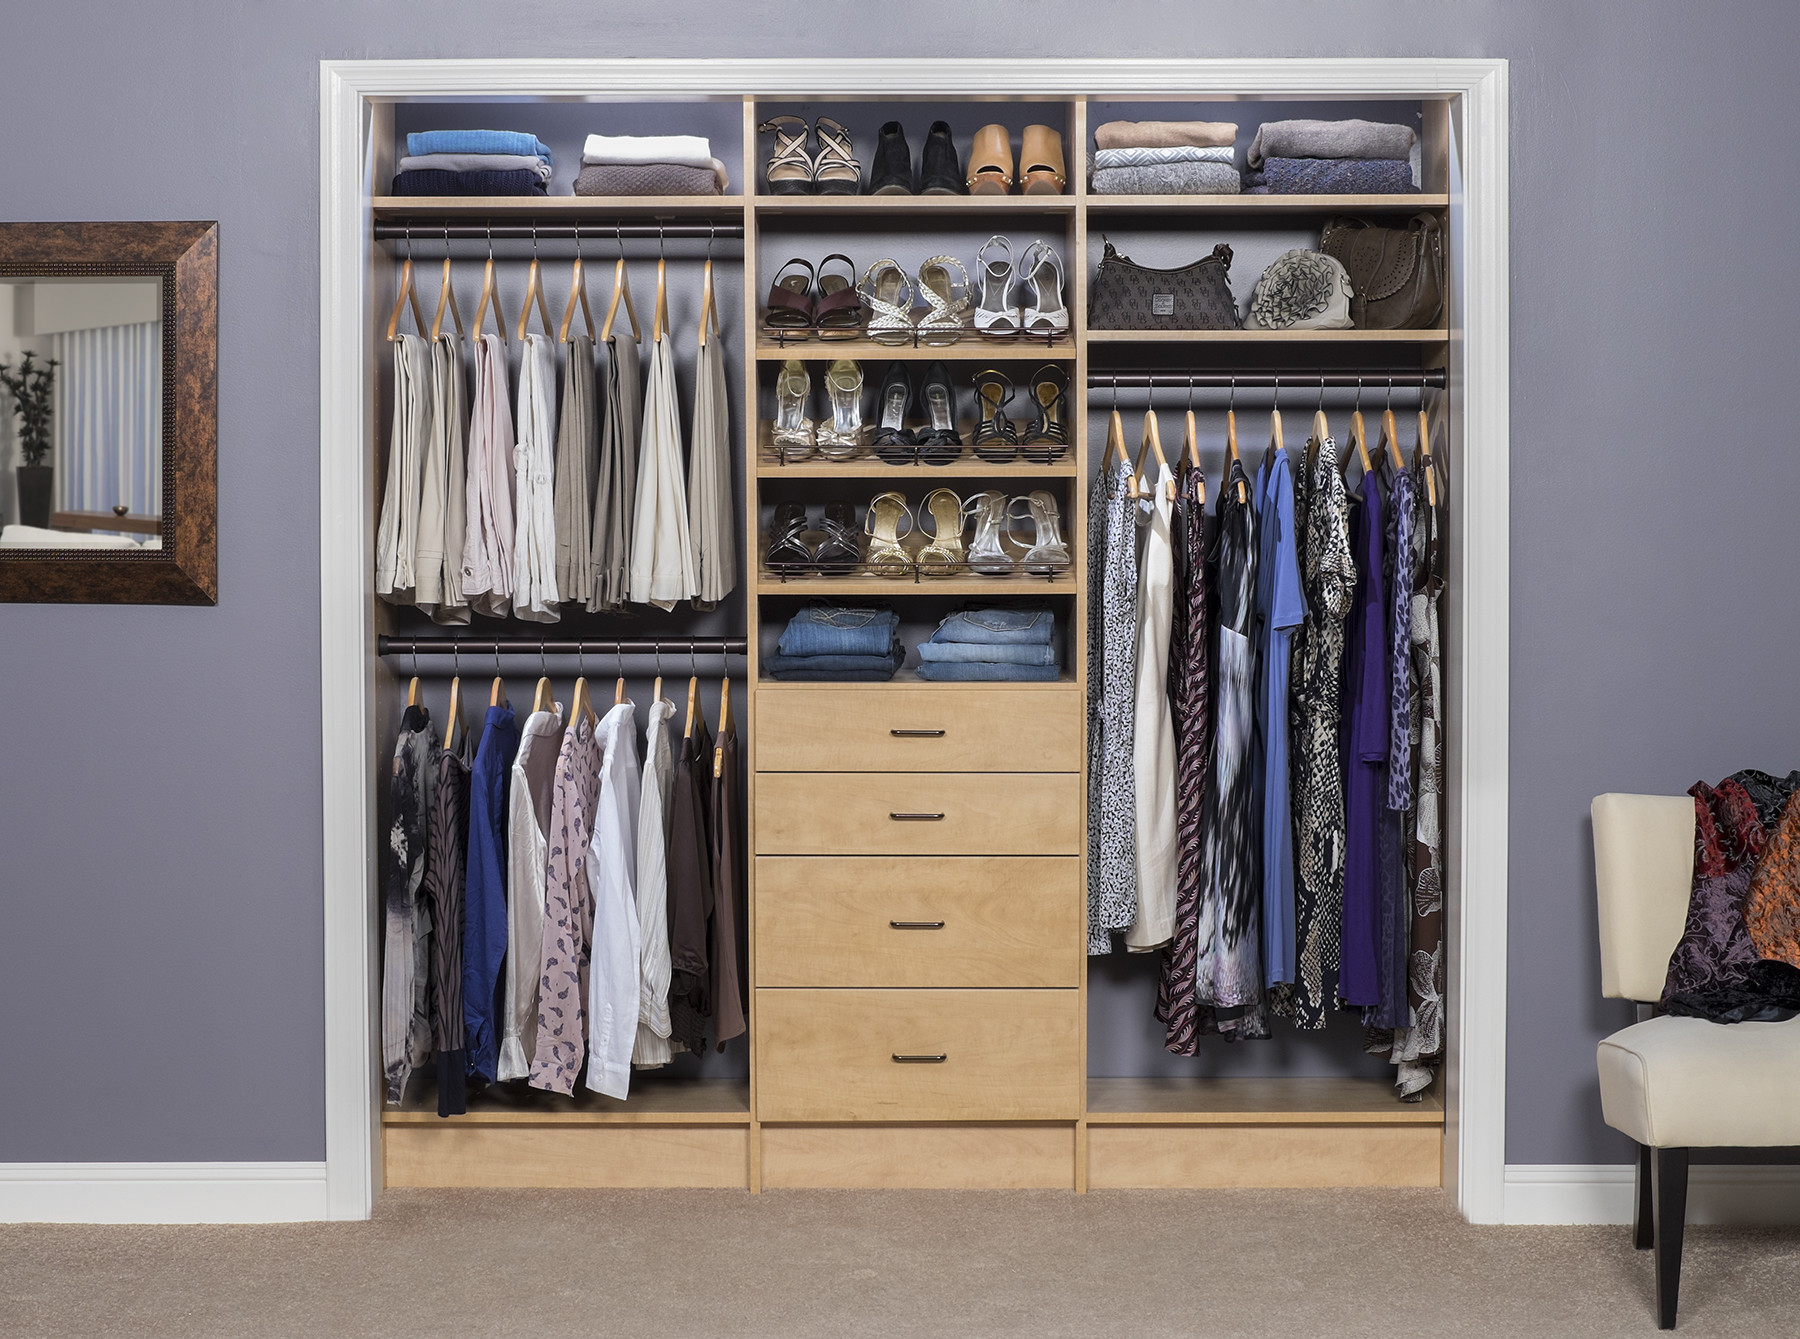 Organizing Closets and Pantries Resume Sample Great Expectations – before and after Closet Designs. – Space Age …